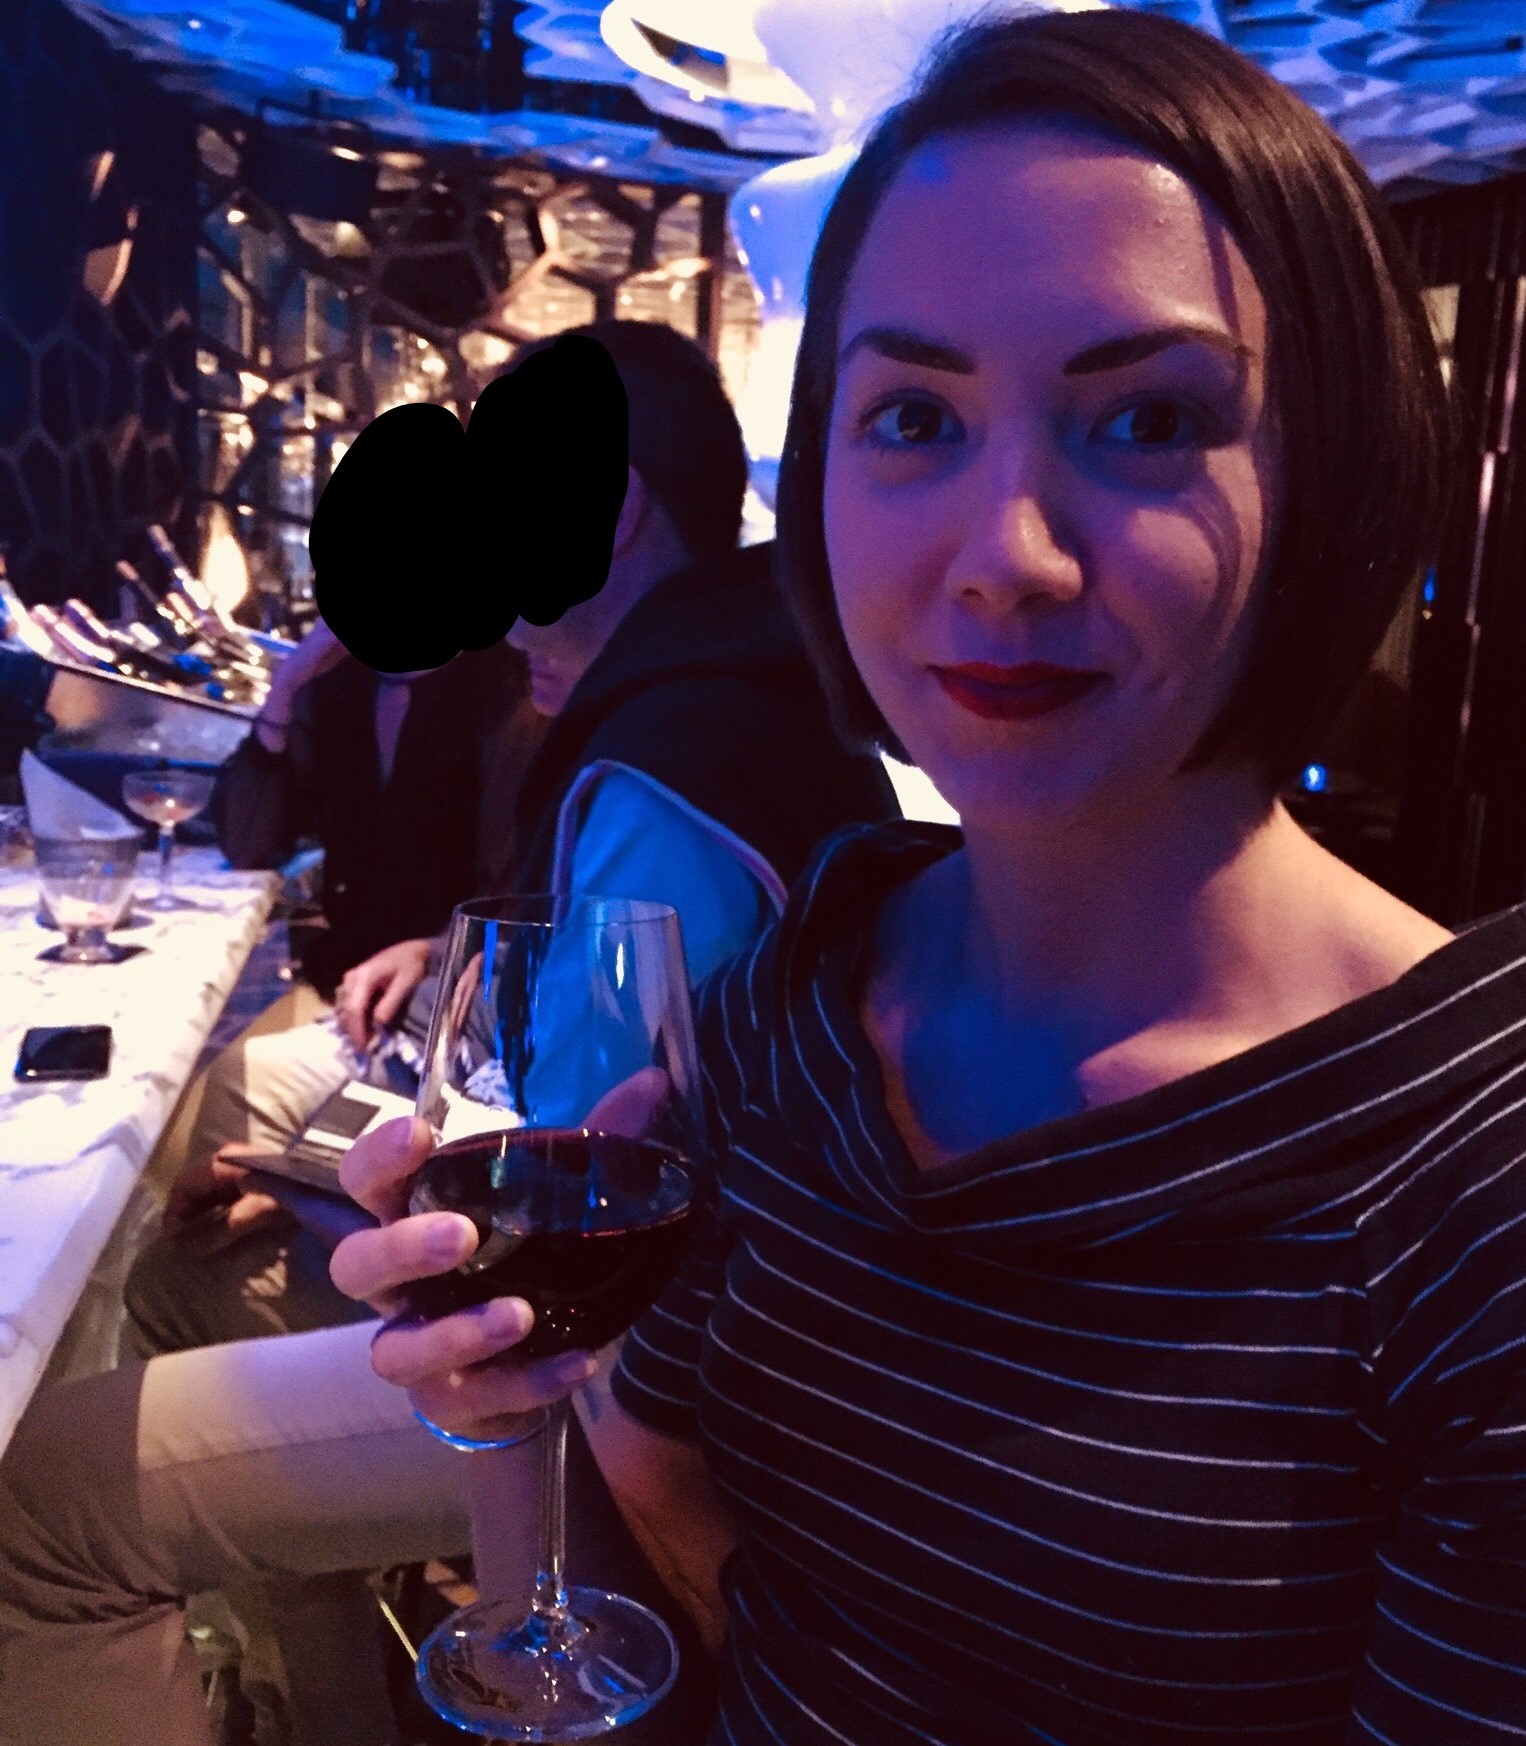 Me in a bar, drinking red wine, about 2 months before getting sober.